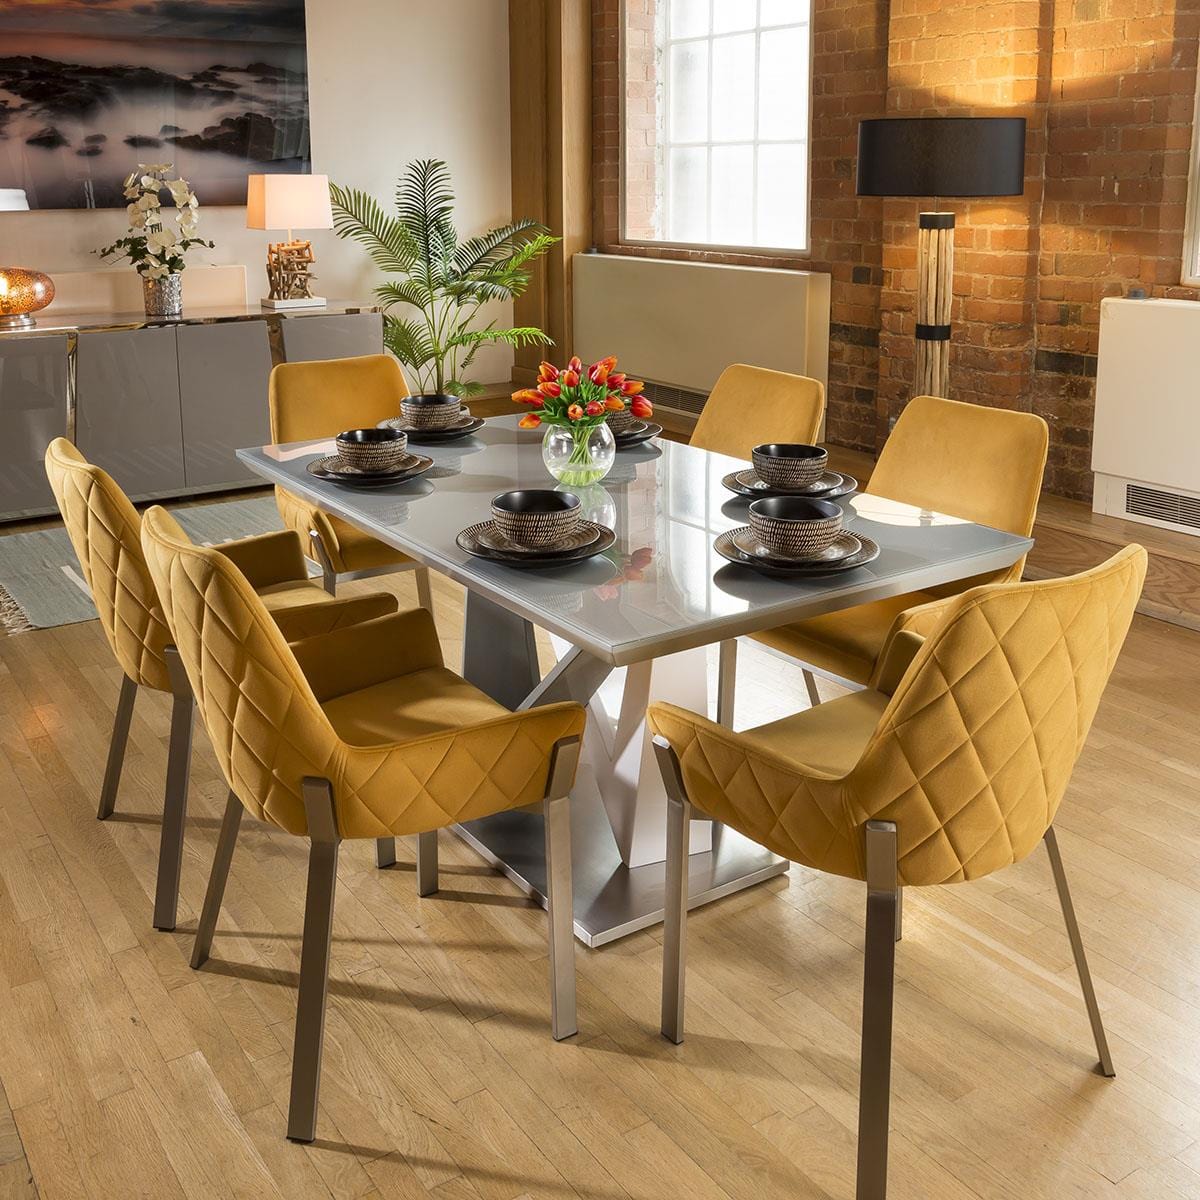 Quatropi Stunning 6 Seater Dining Set Grey / Glass Table With 6 Mustard Chairs